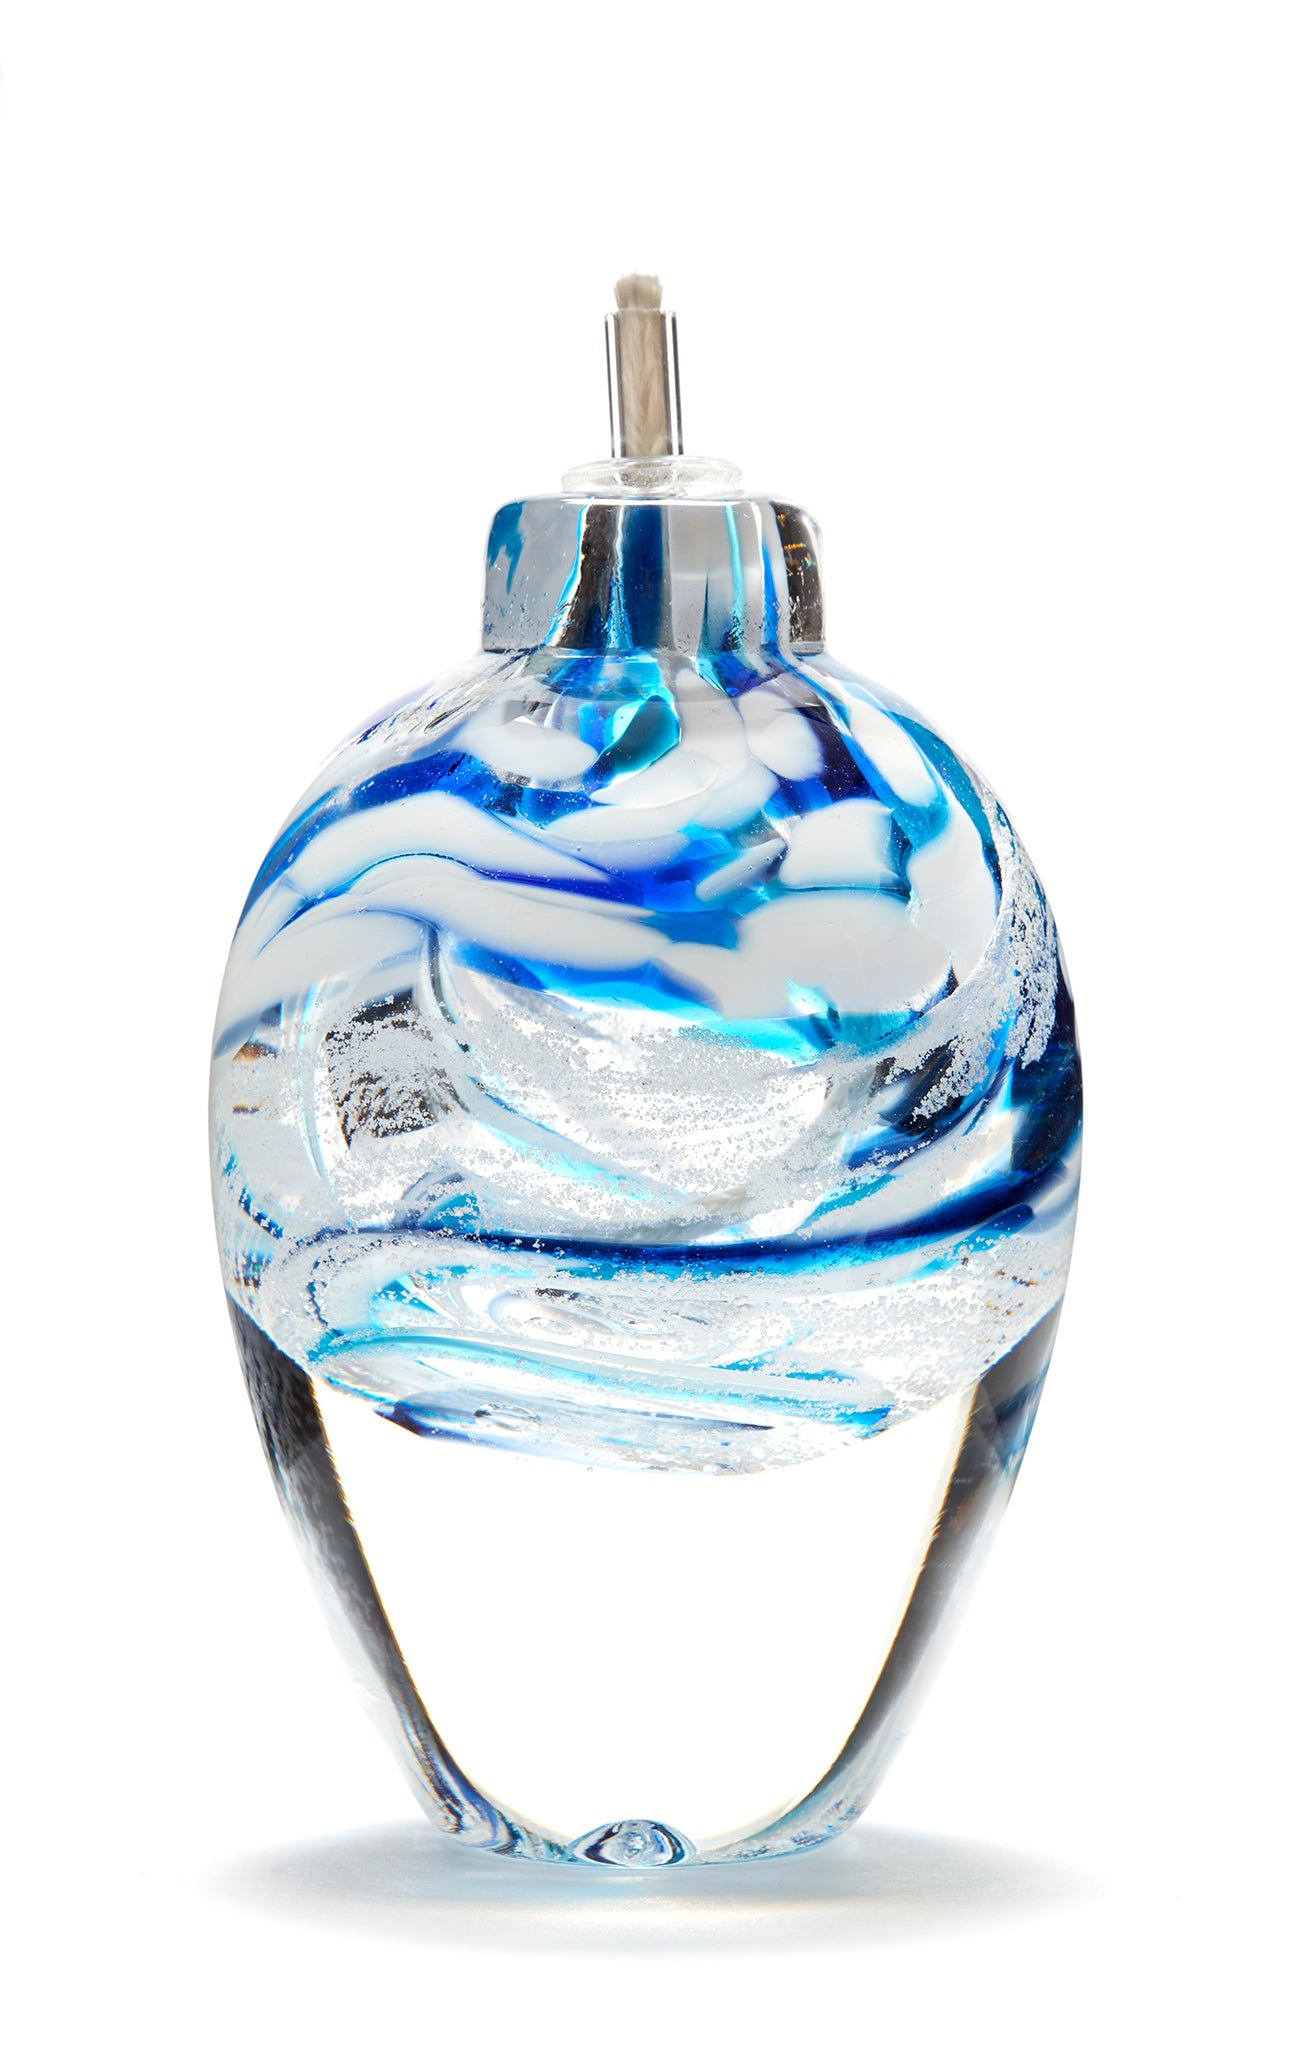 Memorial glass art tall eternal flame oil lamp with cremation ash. Cobalt blue, teal blue, and white glass. Colour combination is called "Winter."